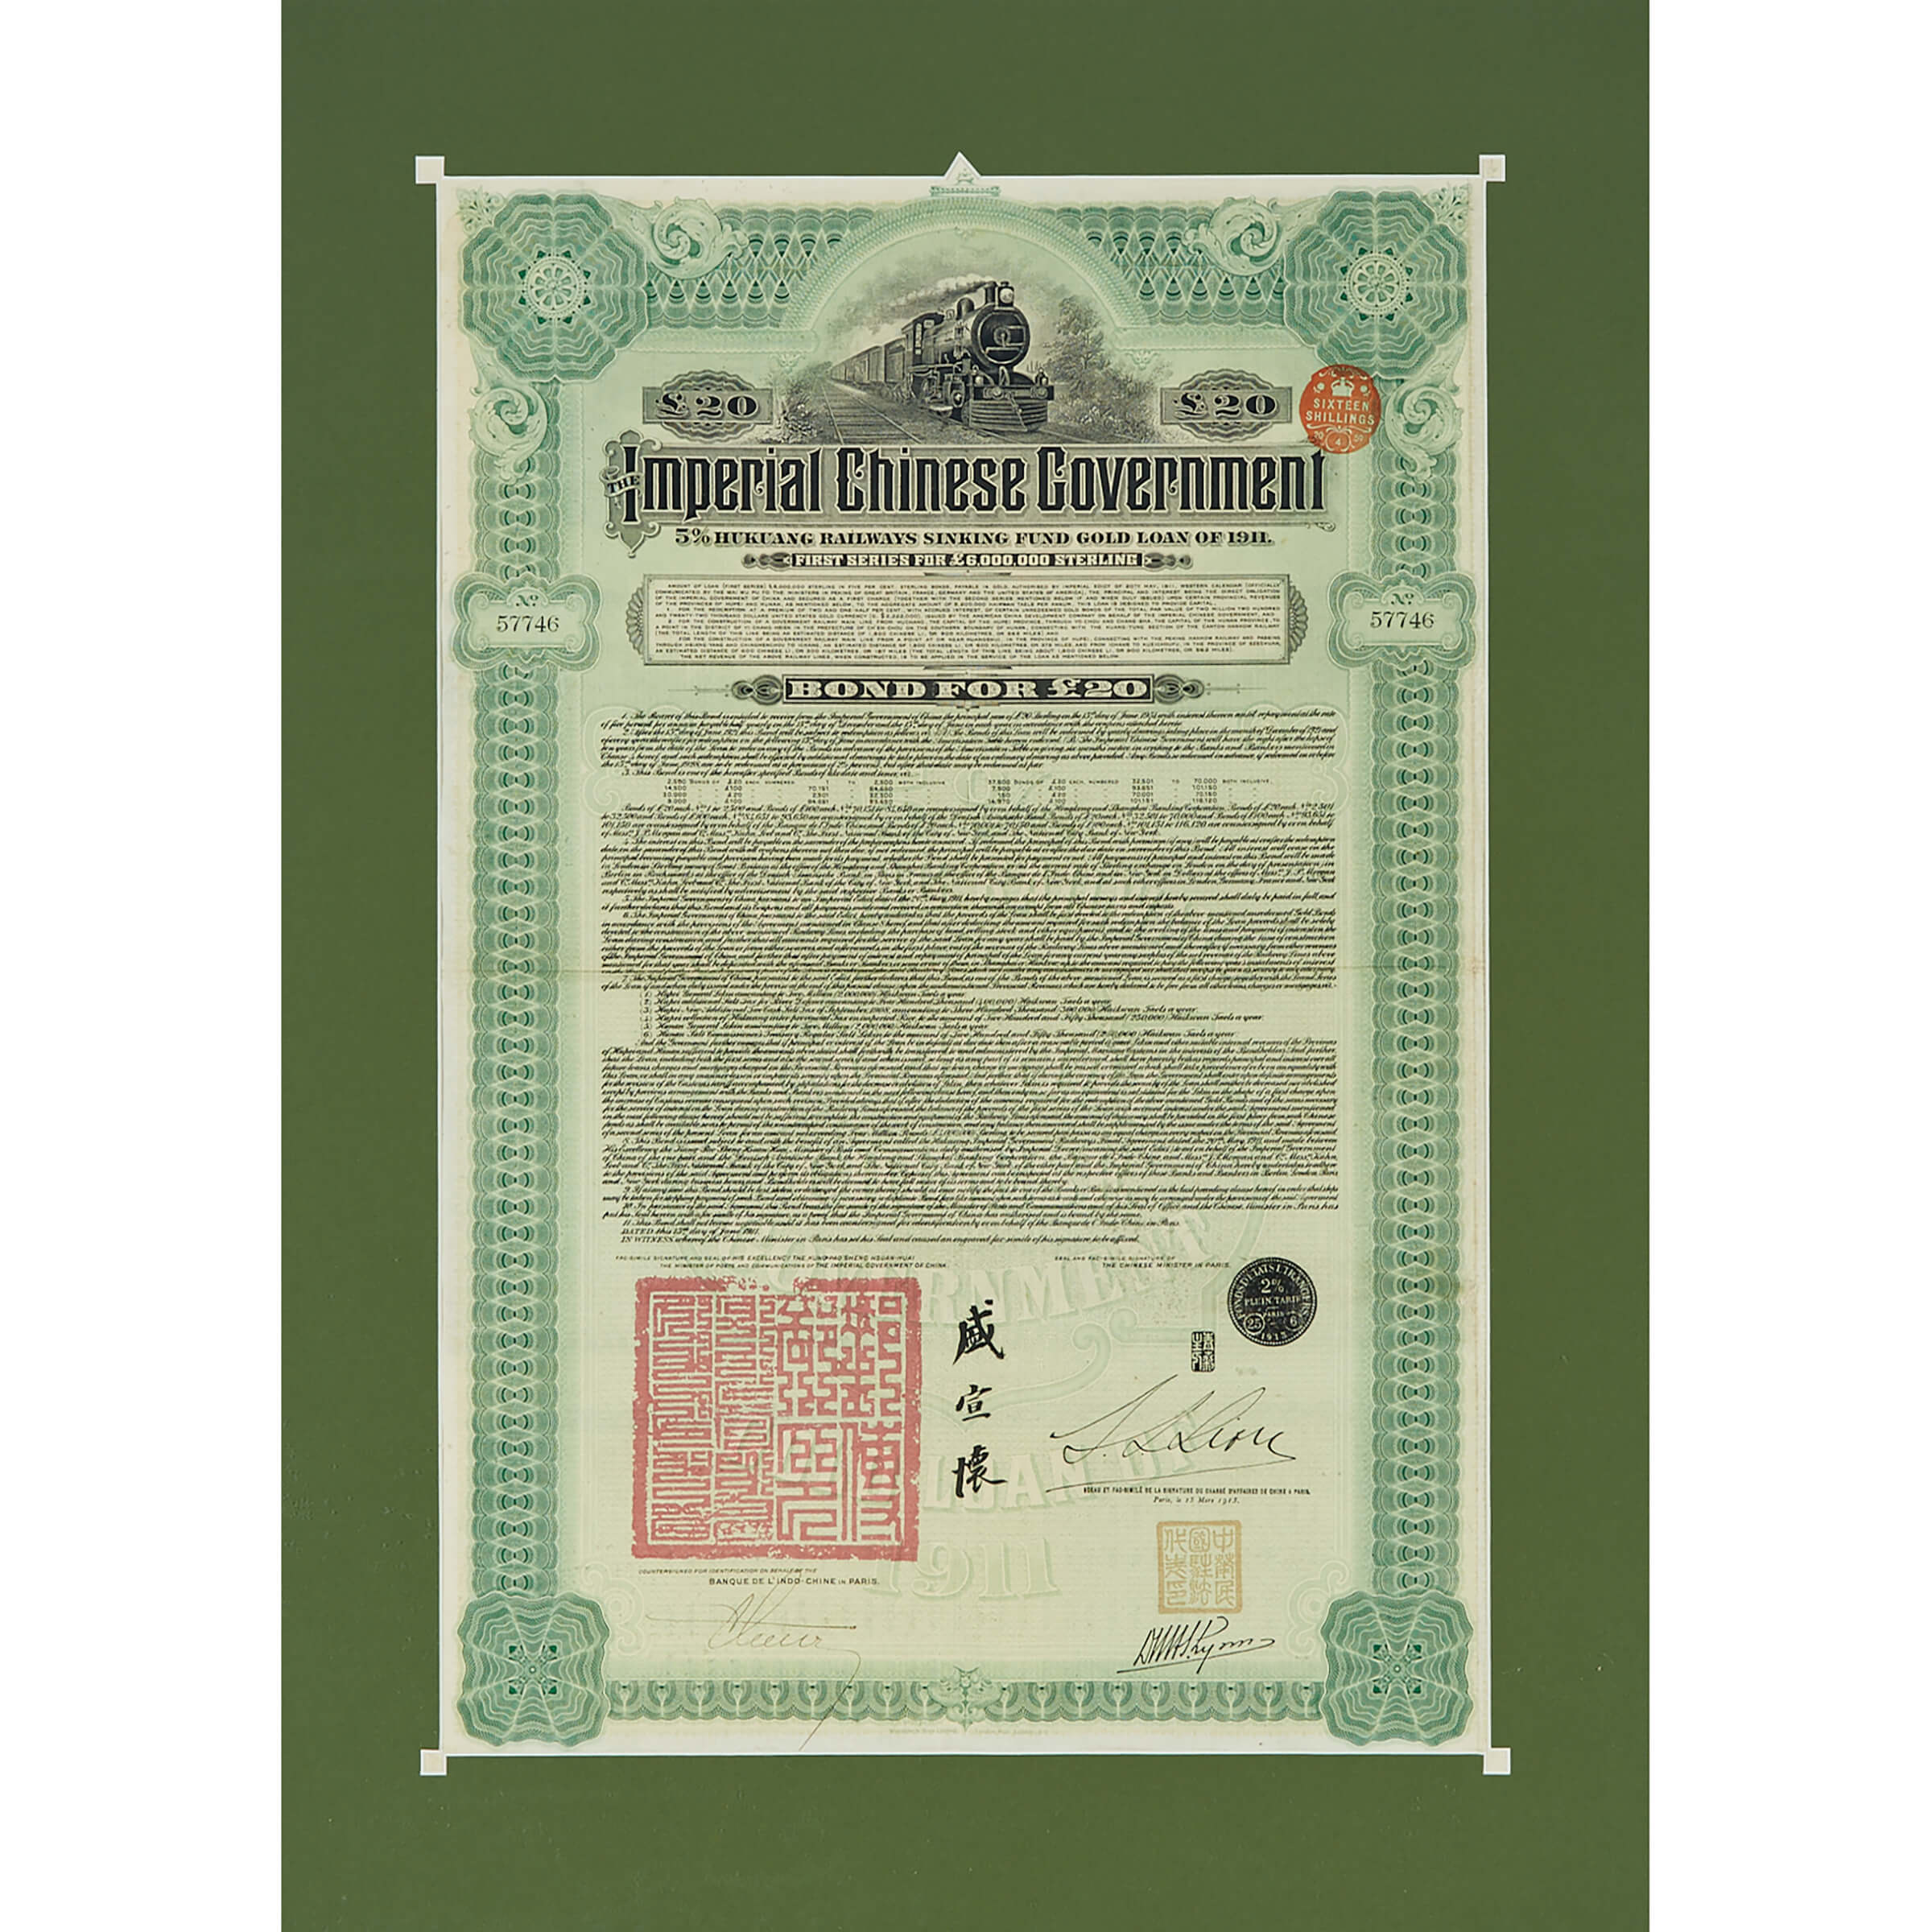 Imperial Chinese Government Hukuang  Railways £20 Bond Note, 1911